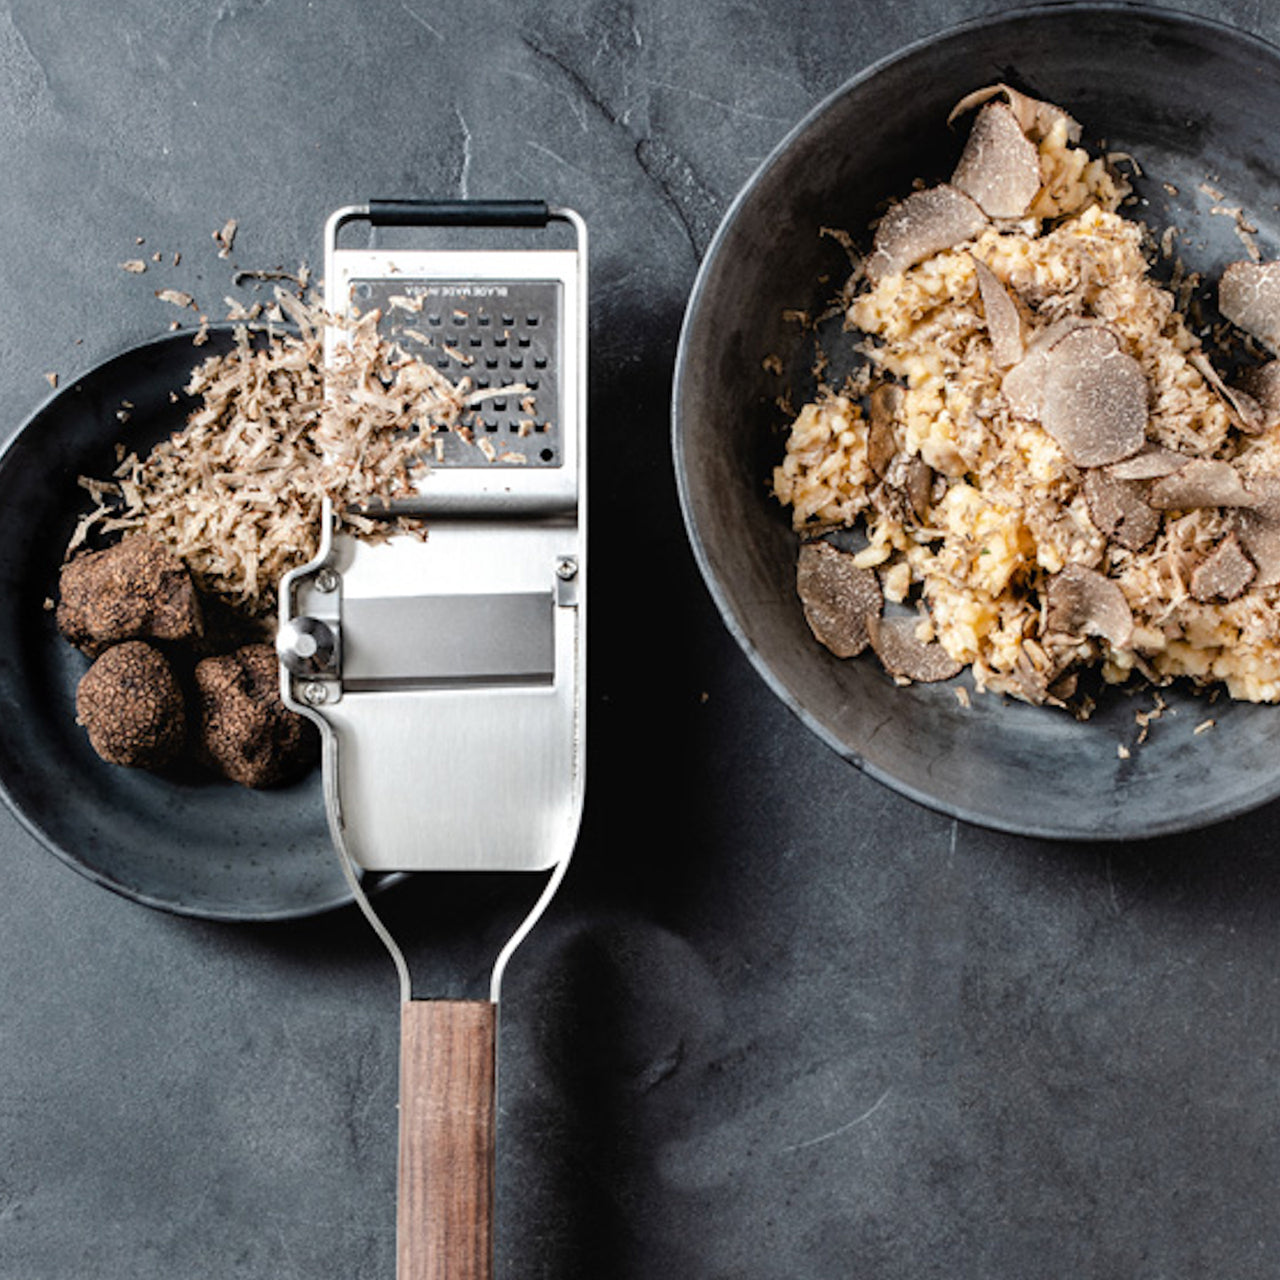 Microplane Truffle Slicer & Grater